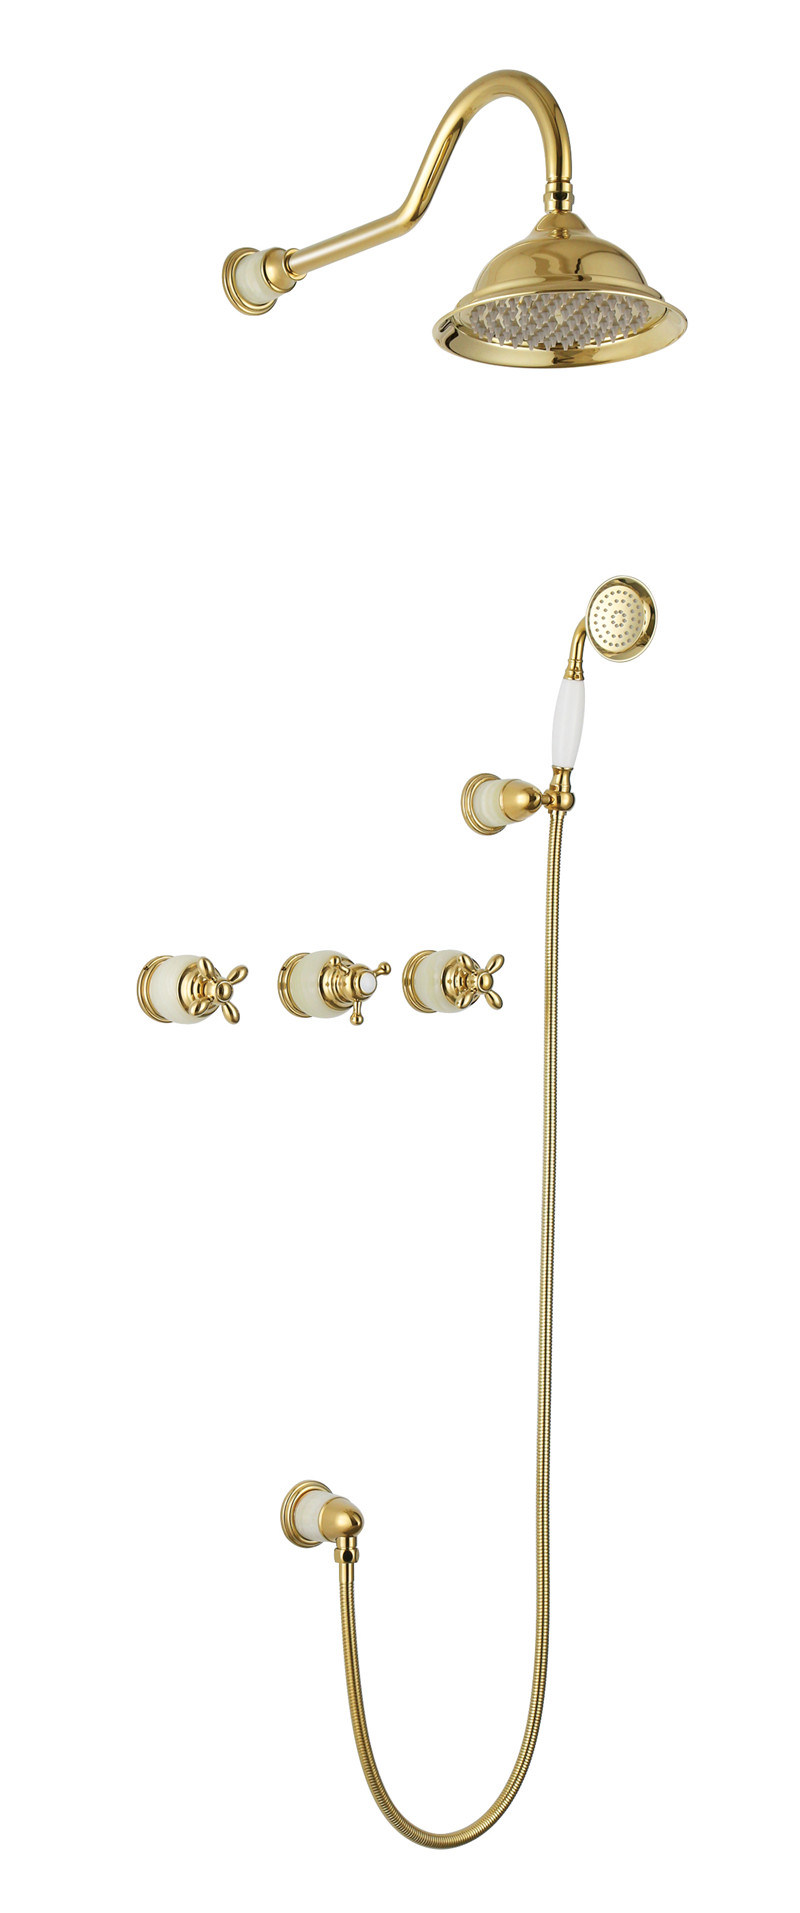 Wall Mounted Antique Brass Concealed Shower Set (zf-W77)